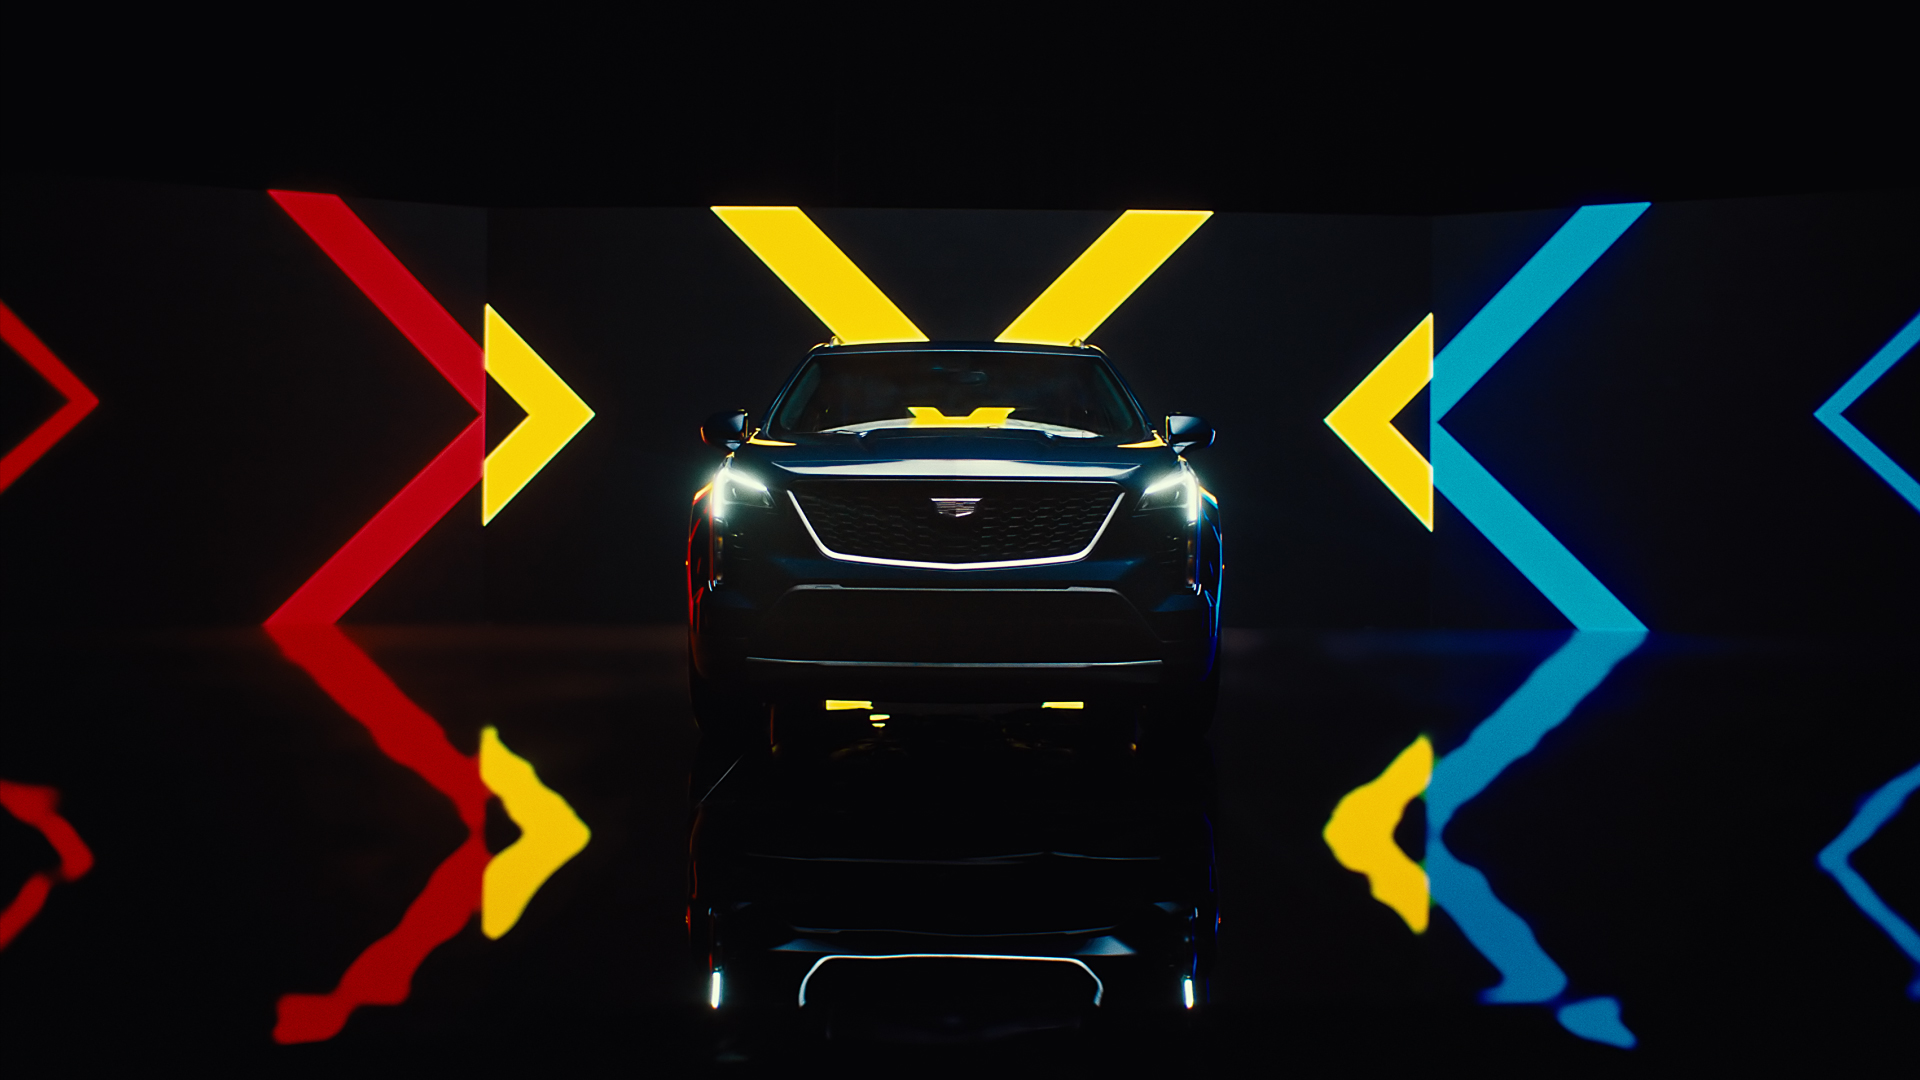 A More Mindful Drive Is Brought To Life By The Cadillac XT4 Through Thoughtful Innovation, Comfort And Space